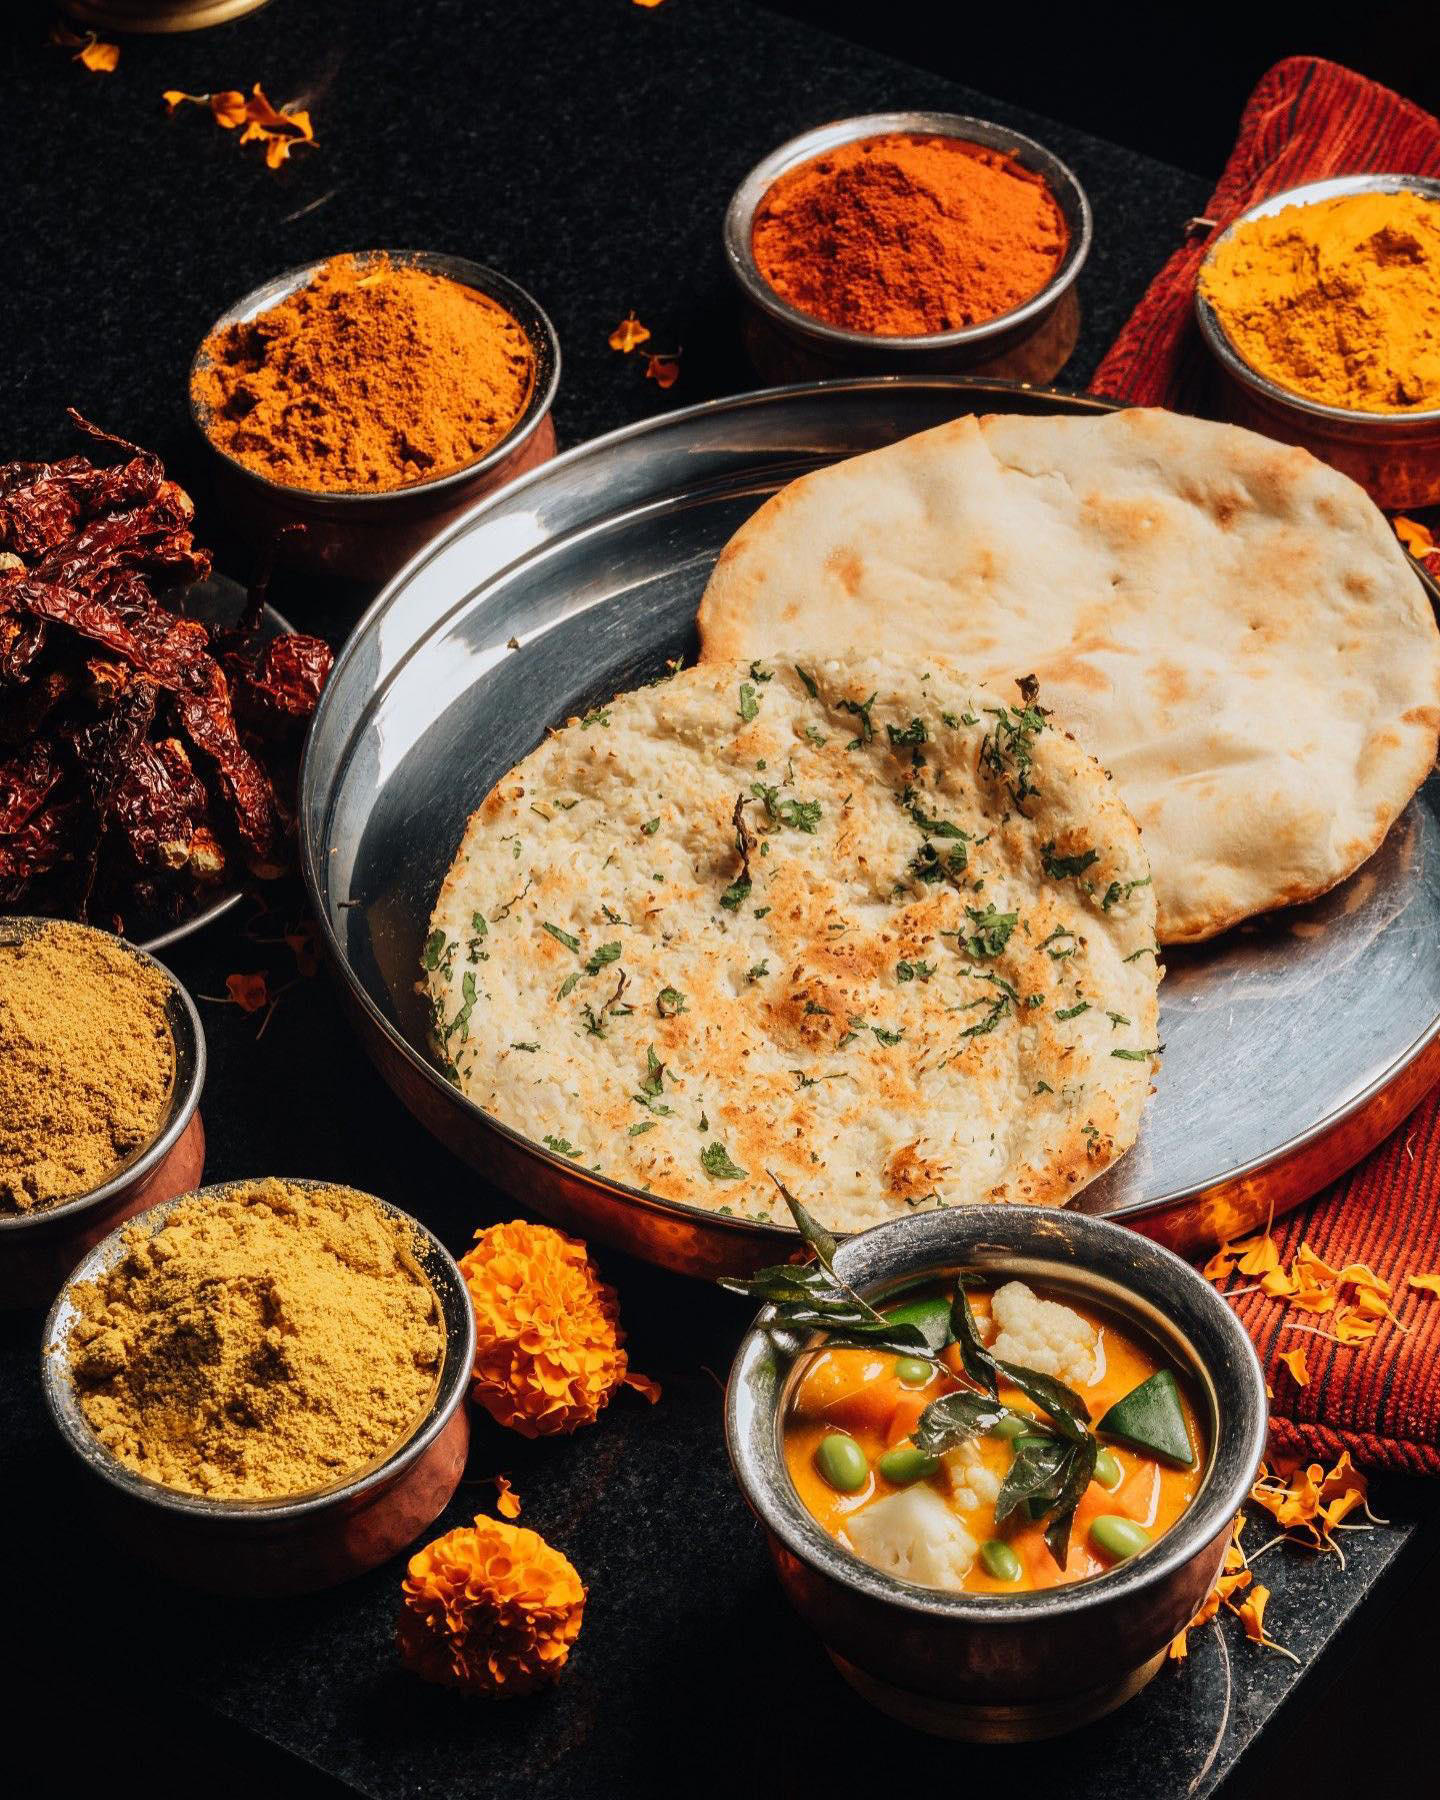 Experience a harmony of flavors and textures with Jaya’s newest dinner series—South Asian Sojourns